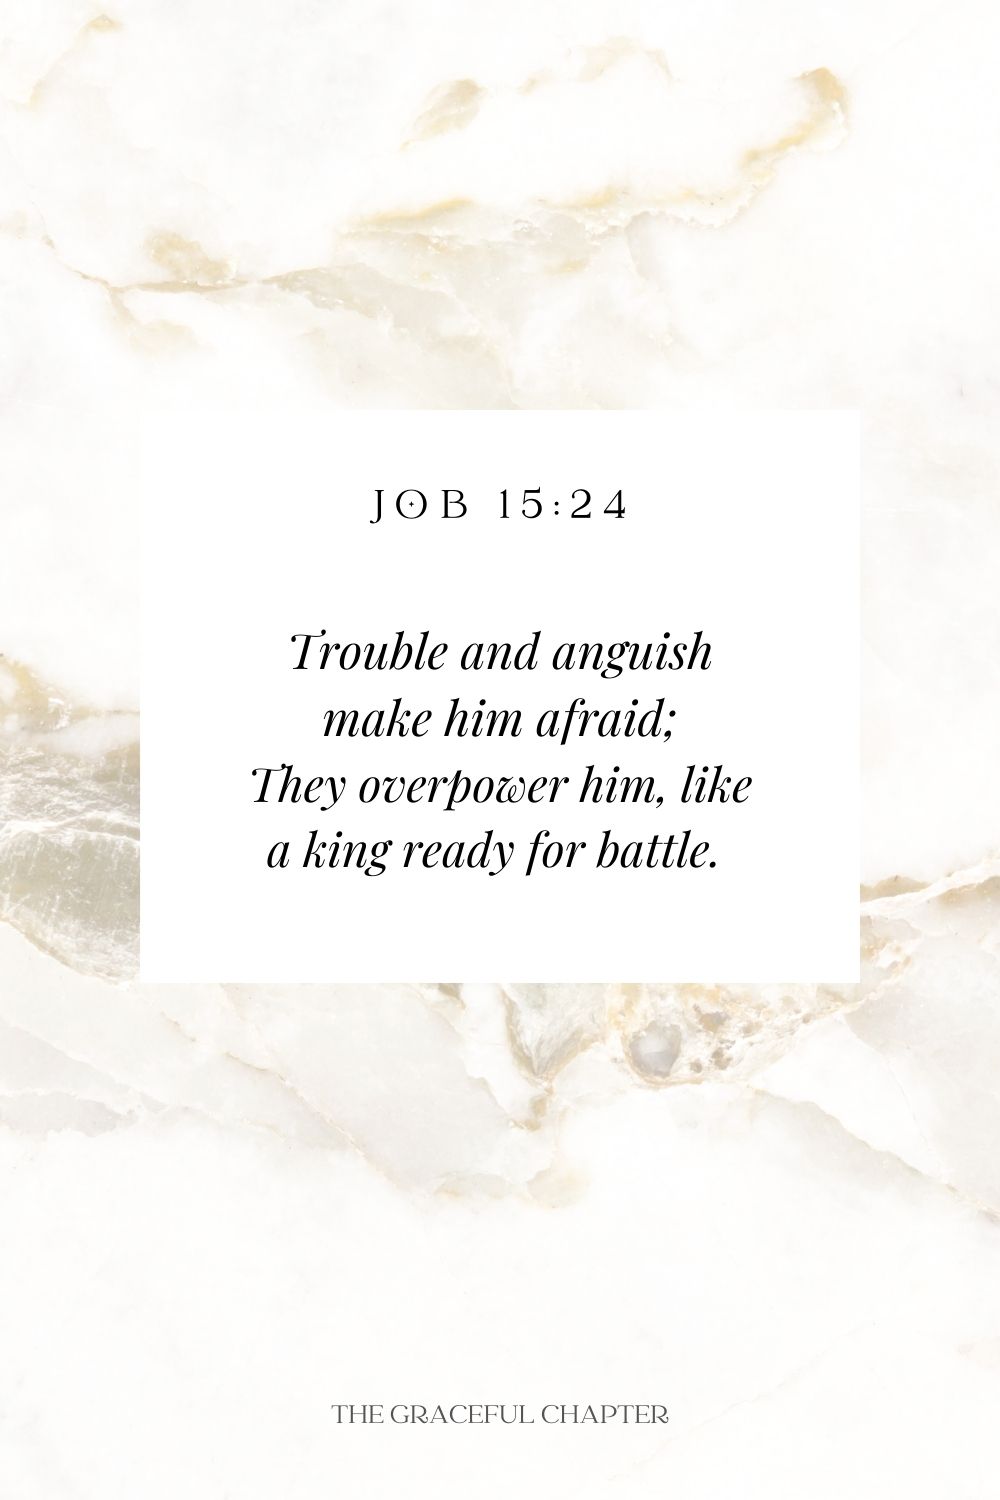 Trouble and anguish make him afraid; They overpower him, like a king ready for battle.  Job 15:24